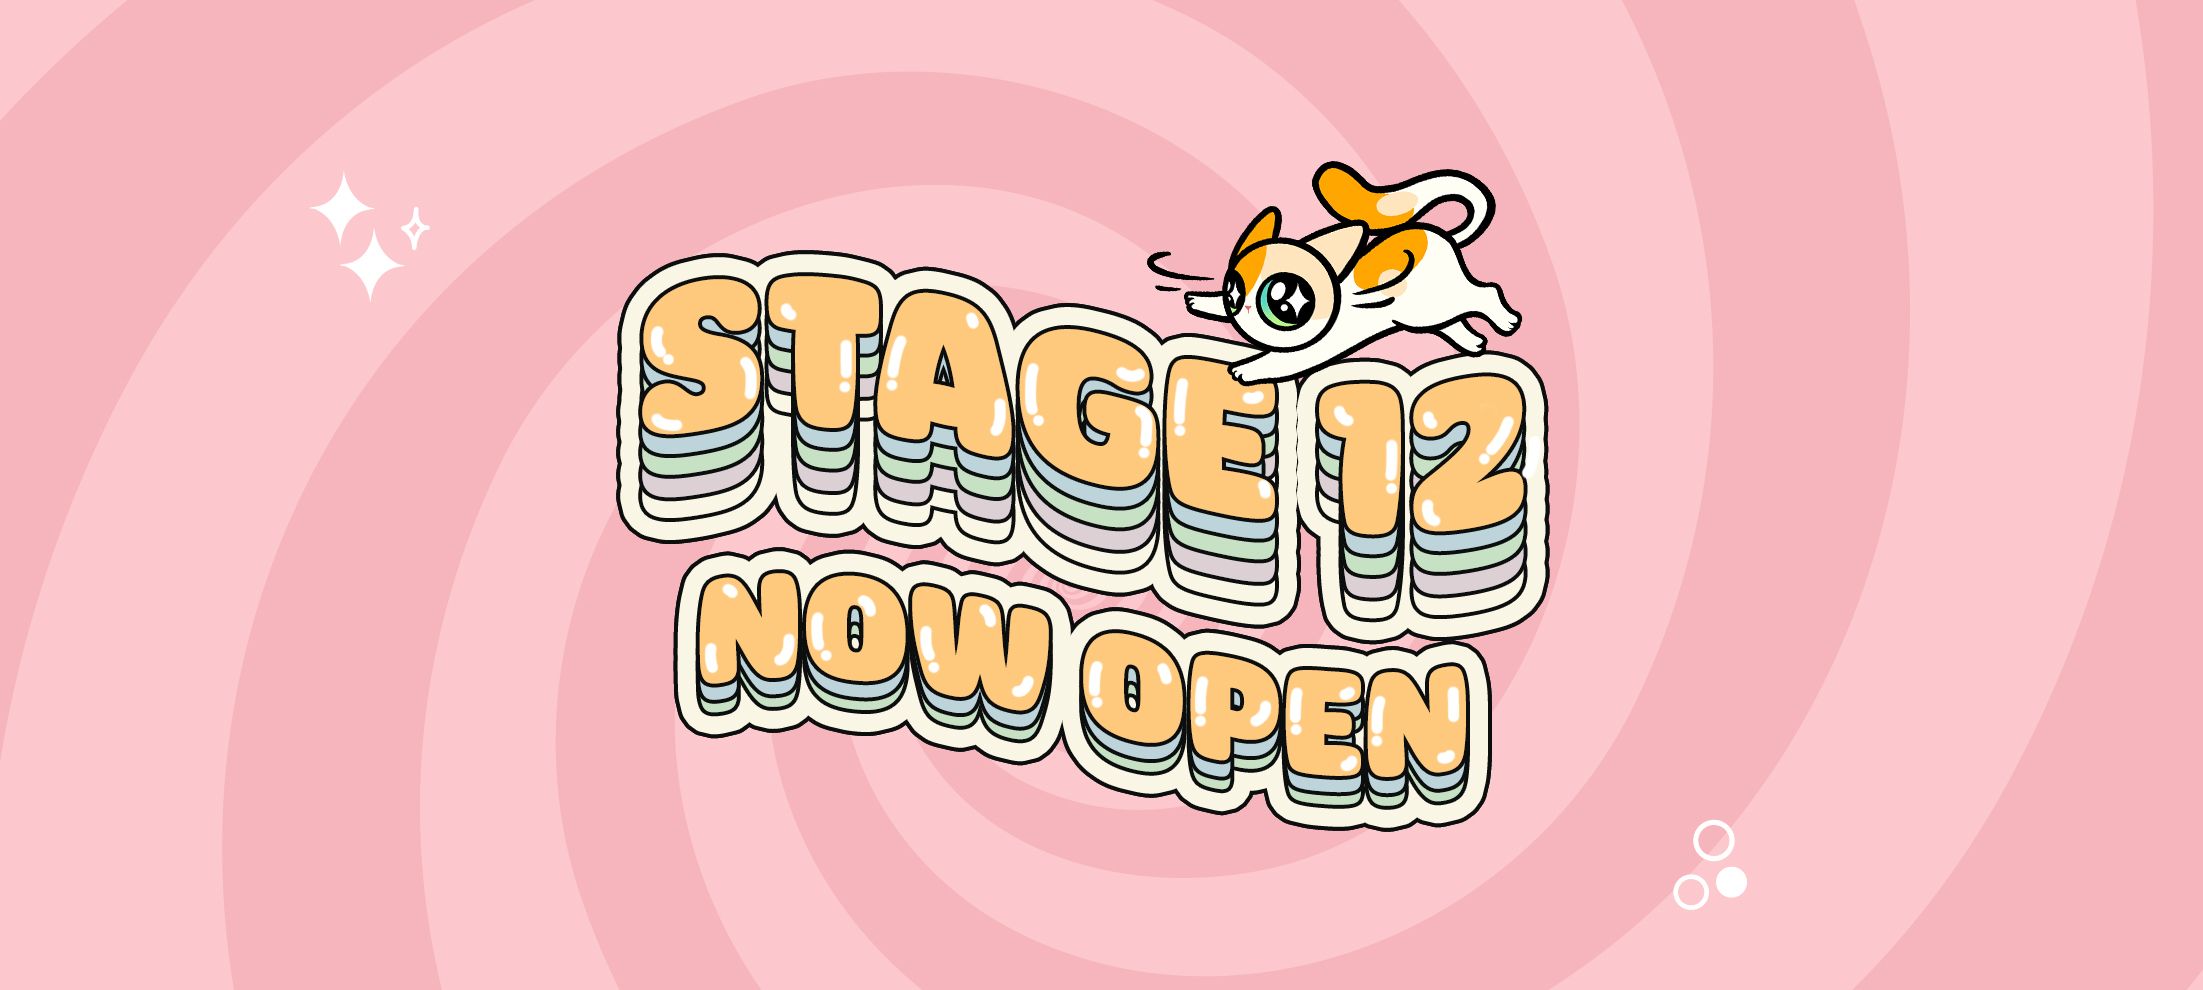 Stage 12 now open